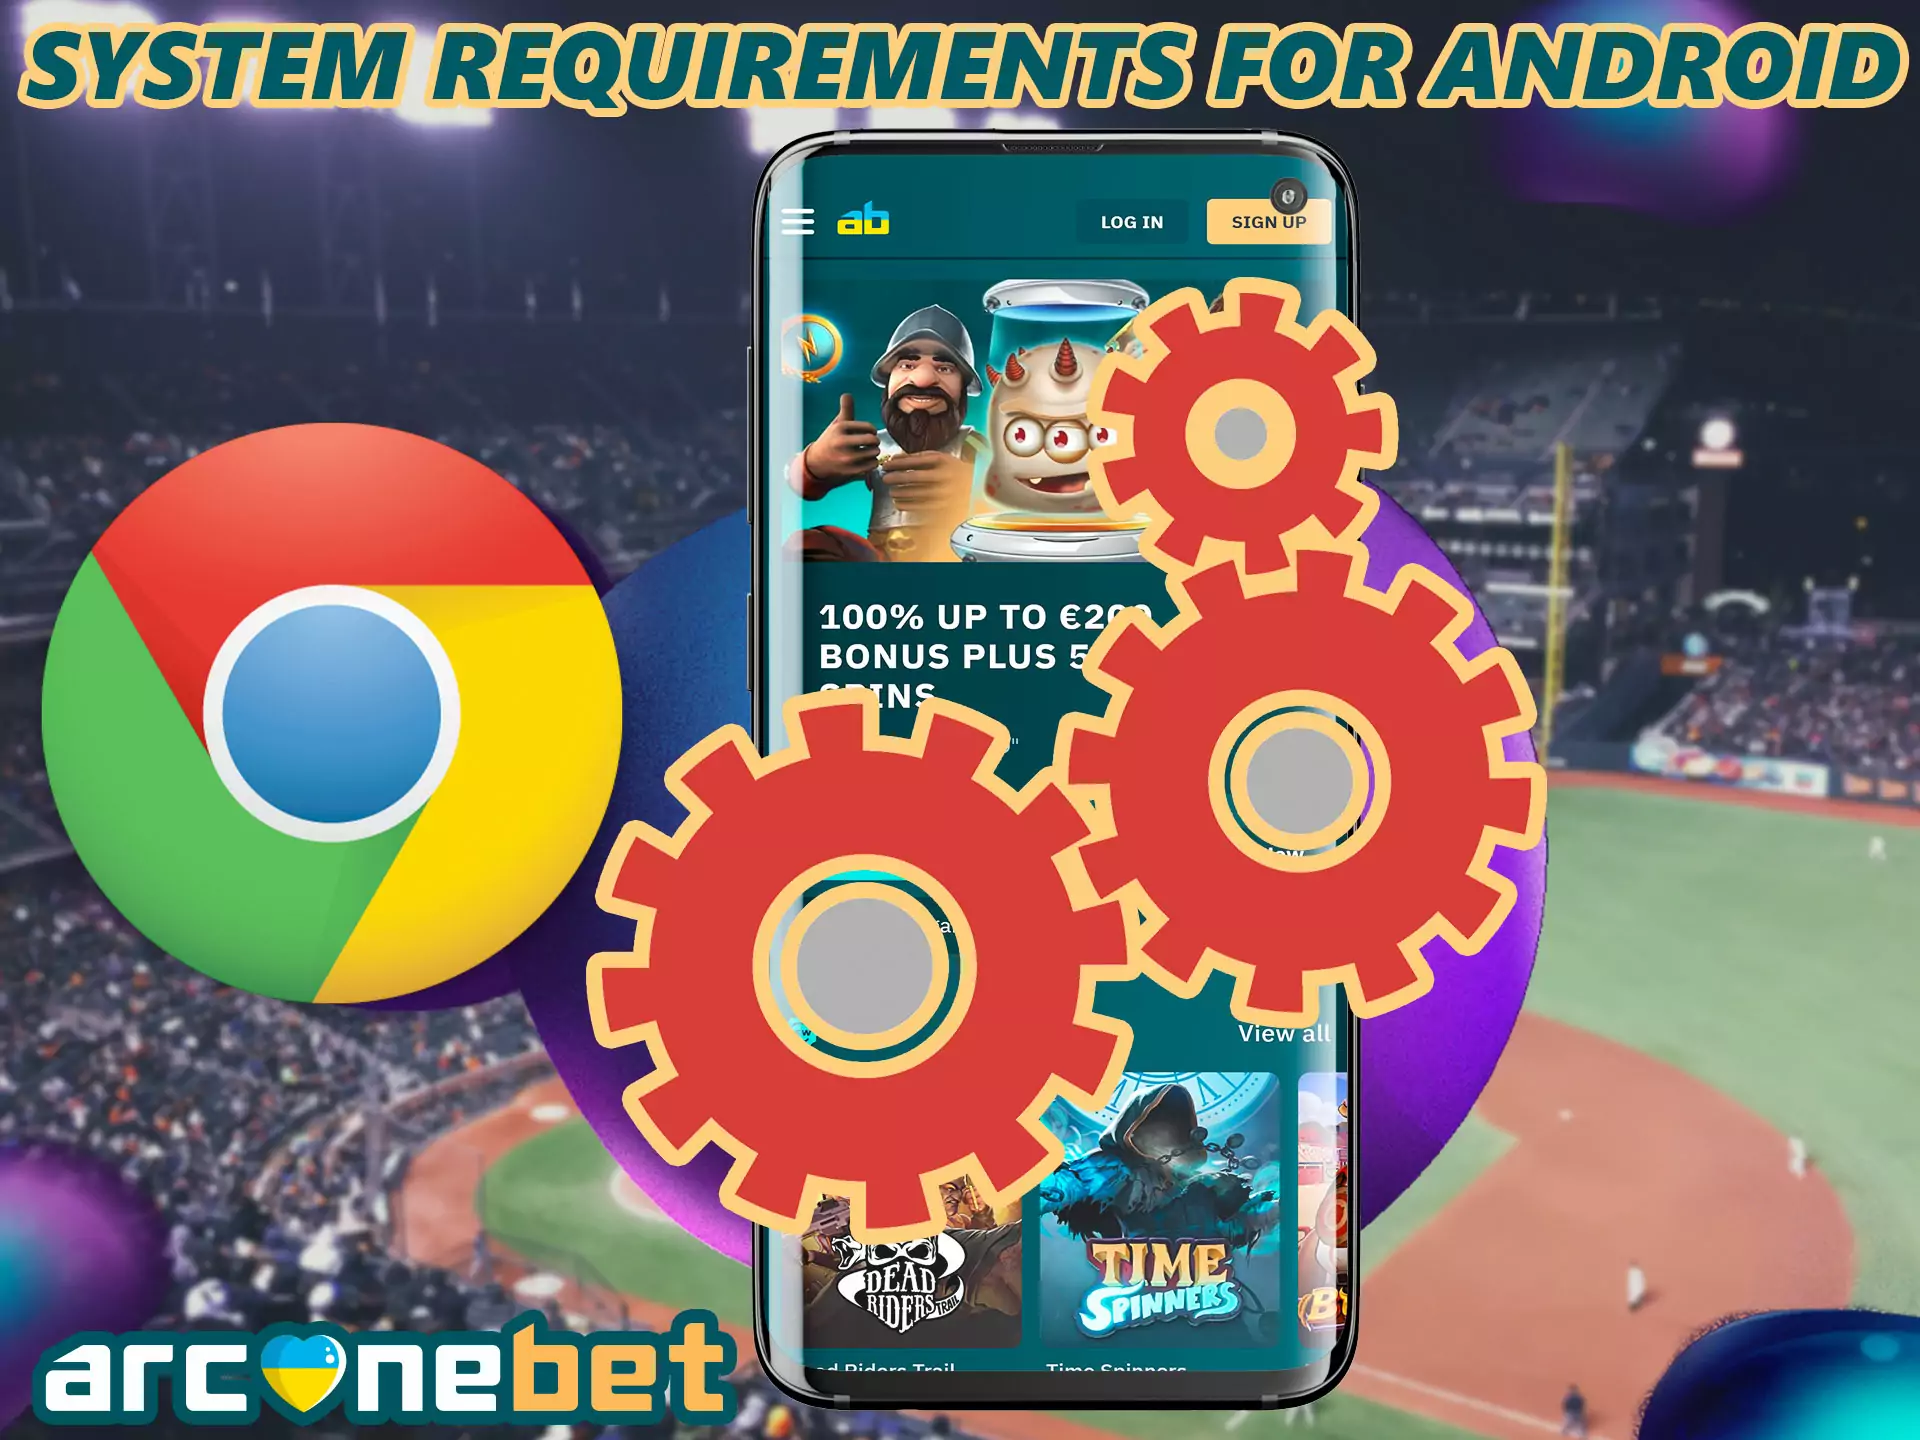 The application is absolutely not demanding on the system requirements of your smartphone, you just need to have a smartphone / tablet and a stable Internet connection.